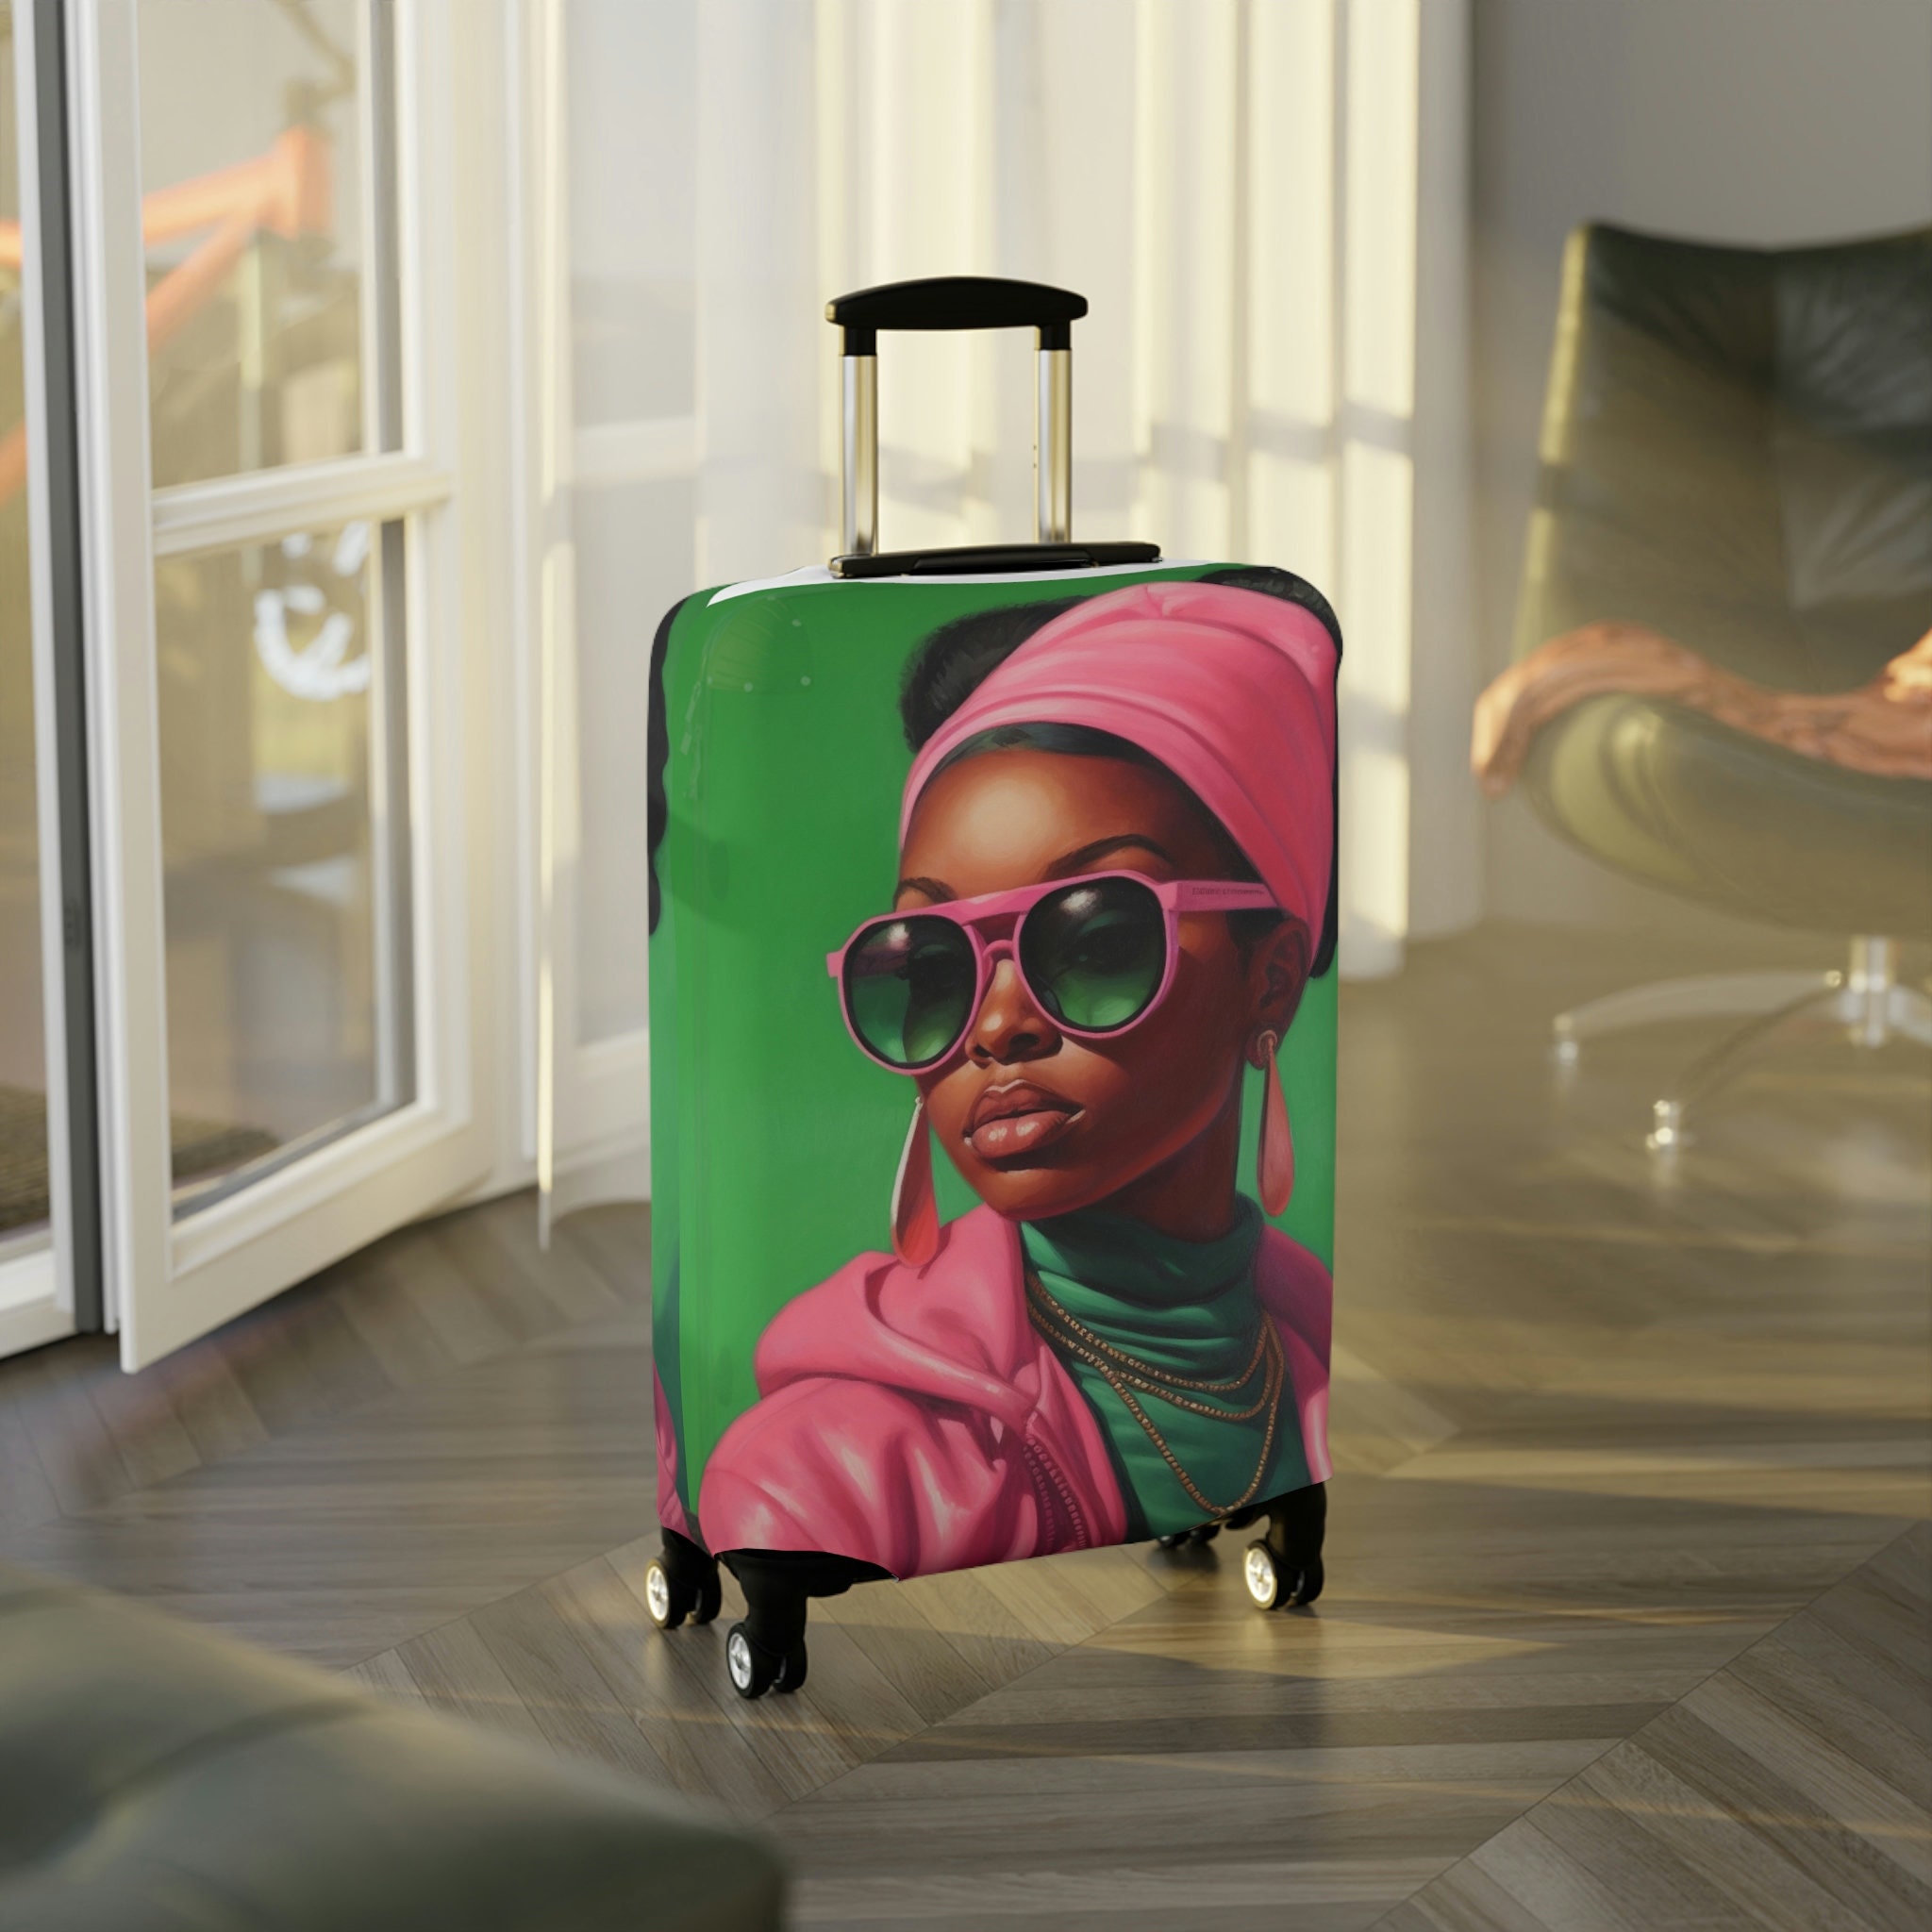 AKA Inspired Luggage Cover, African American Luggage Cover